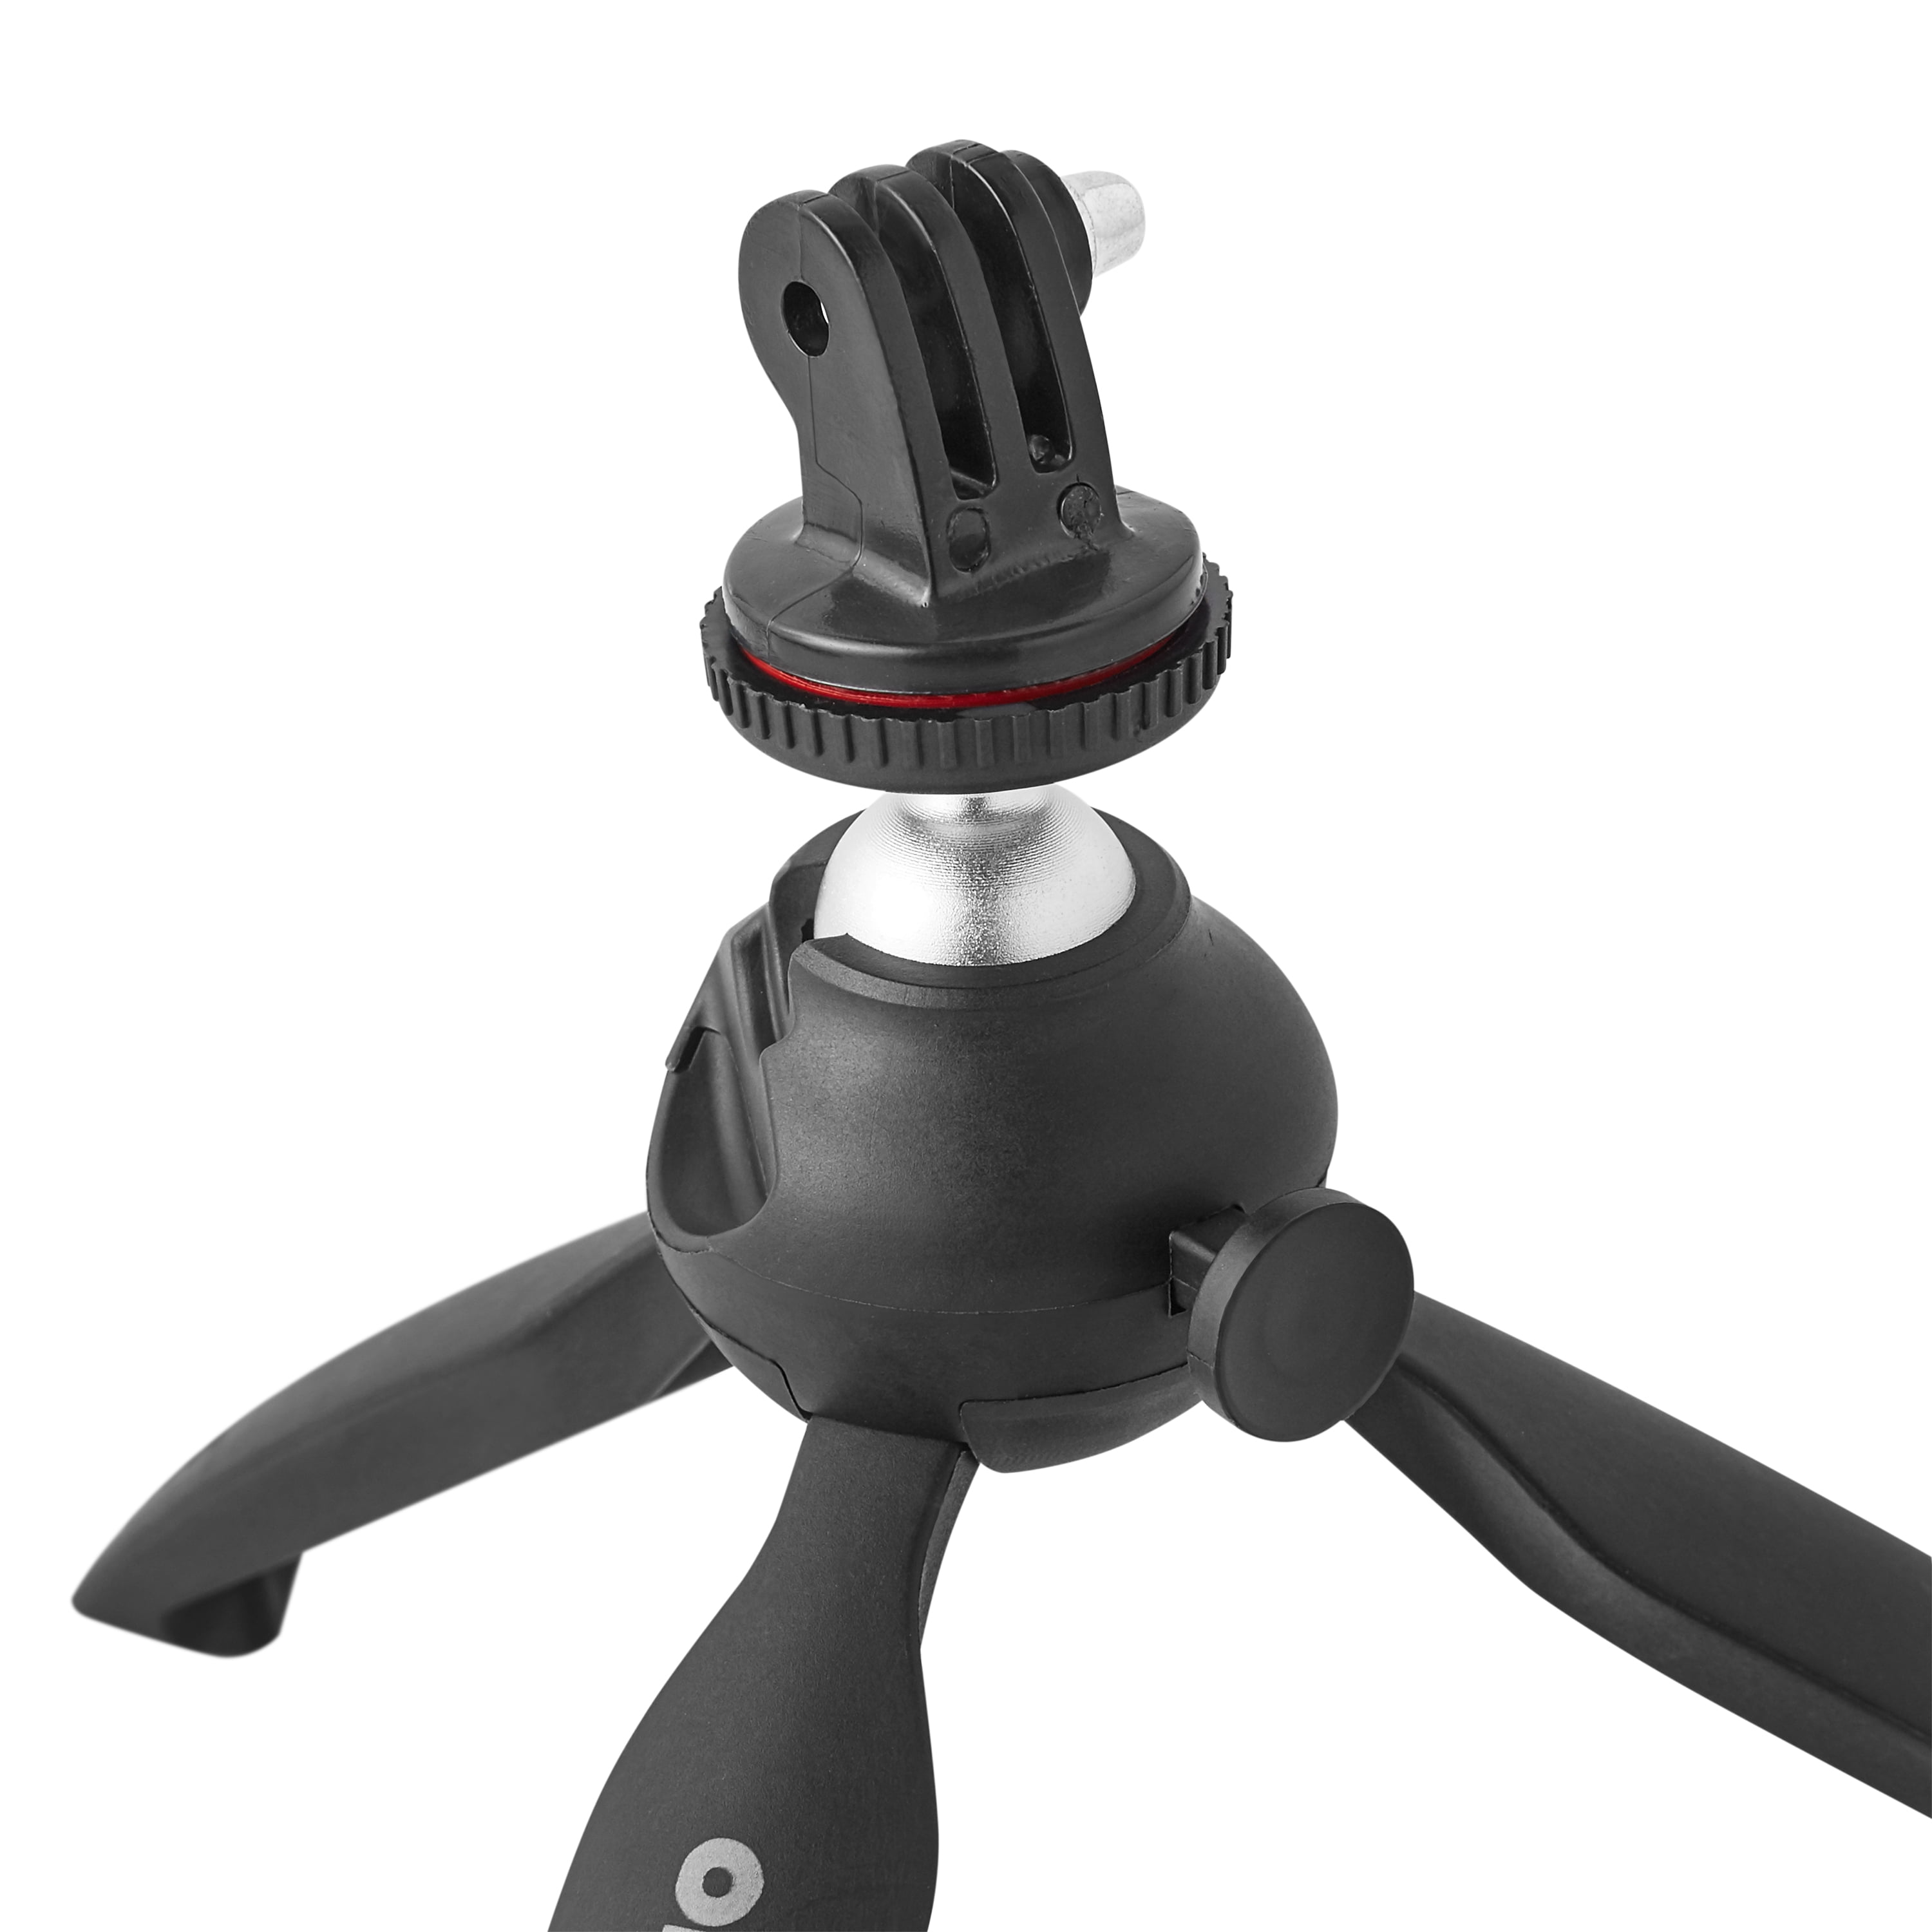 Onn. Adjustable Mini Tripod Stand for Cameras/GoPros/Smartphone